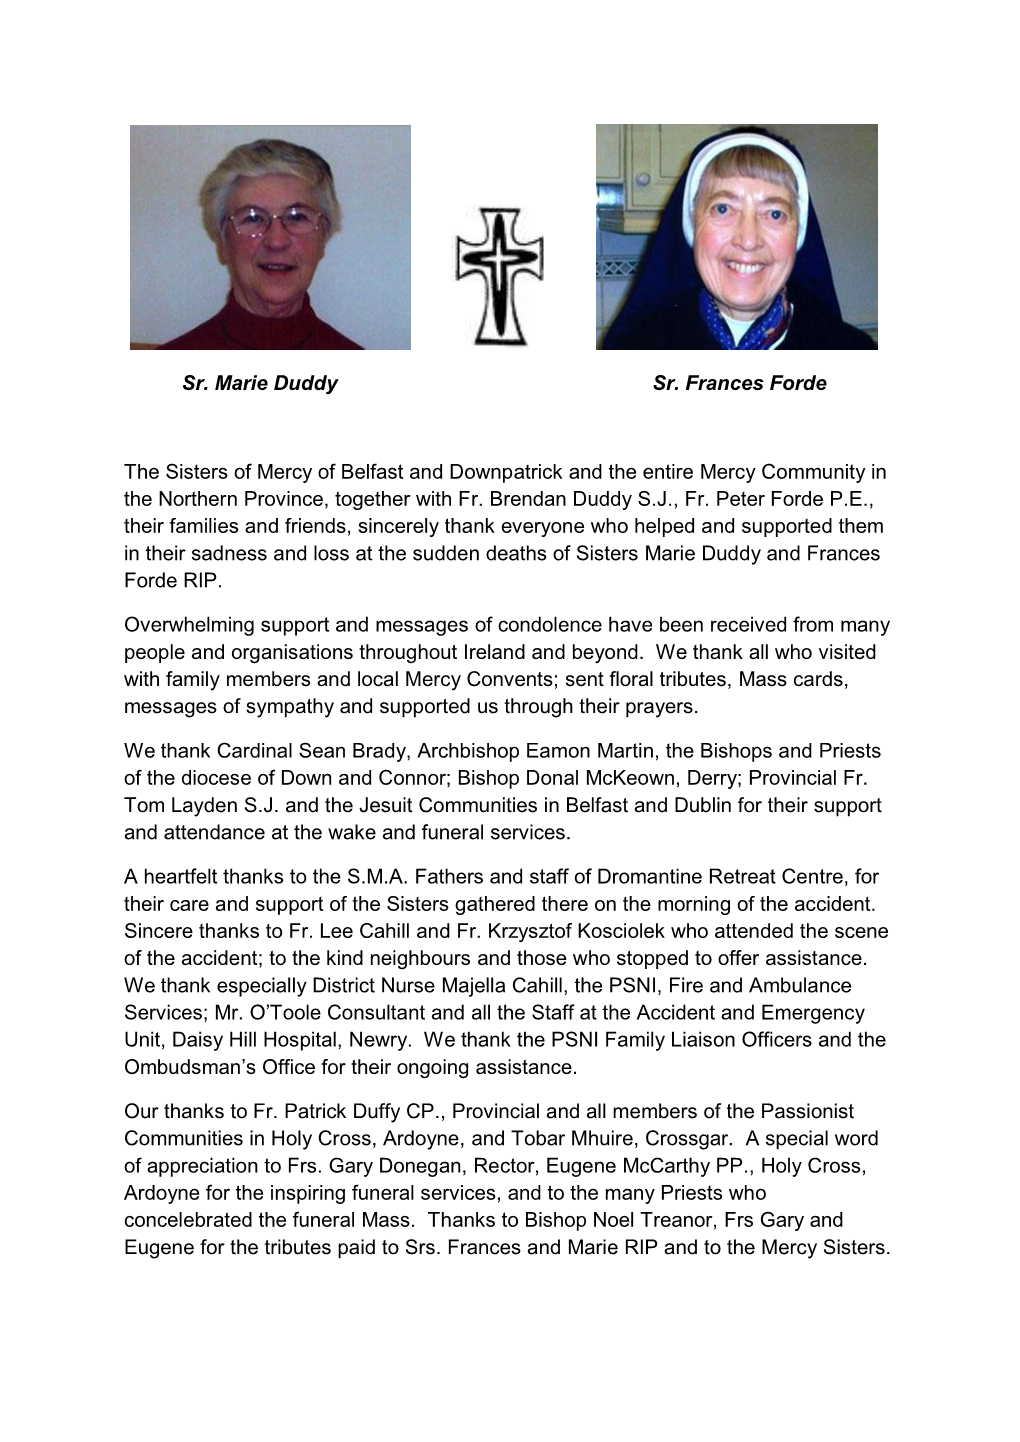 Sr. Marie Duddy Sr. Frances Forde the Sisters of Mercy of Belfast And